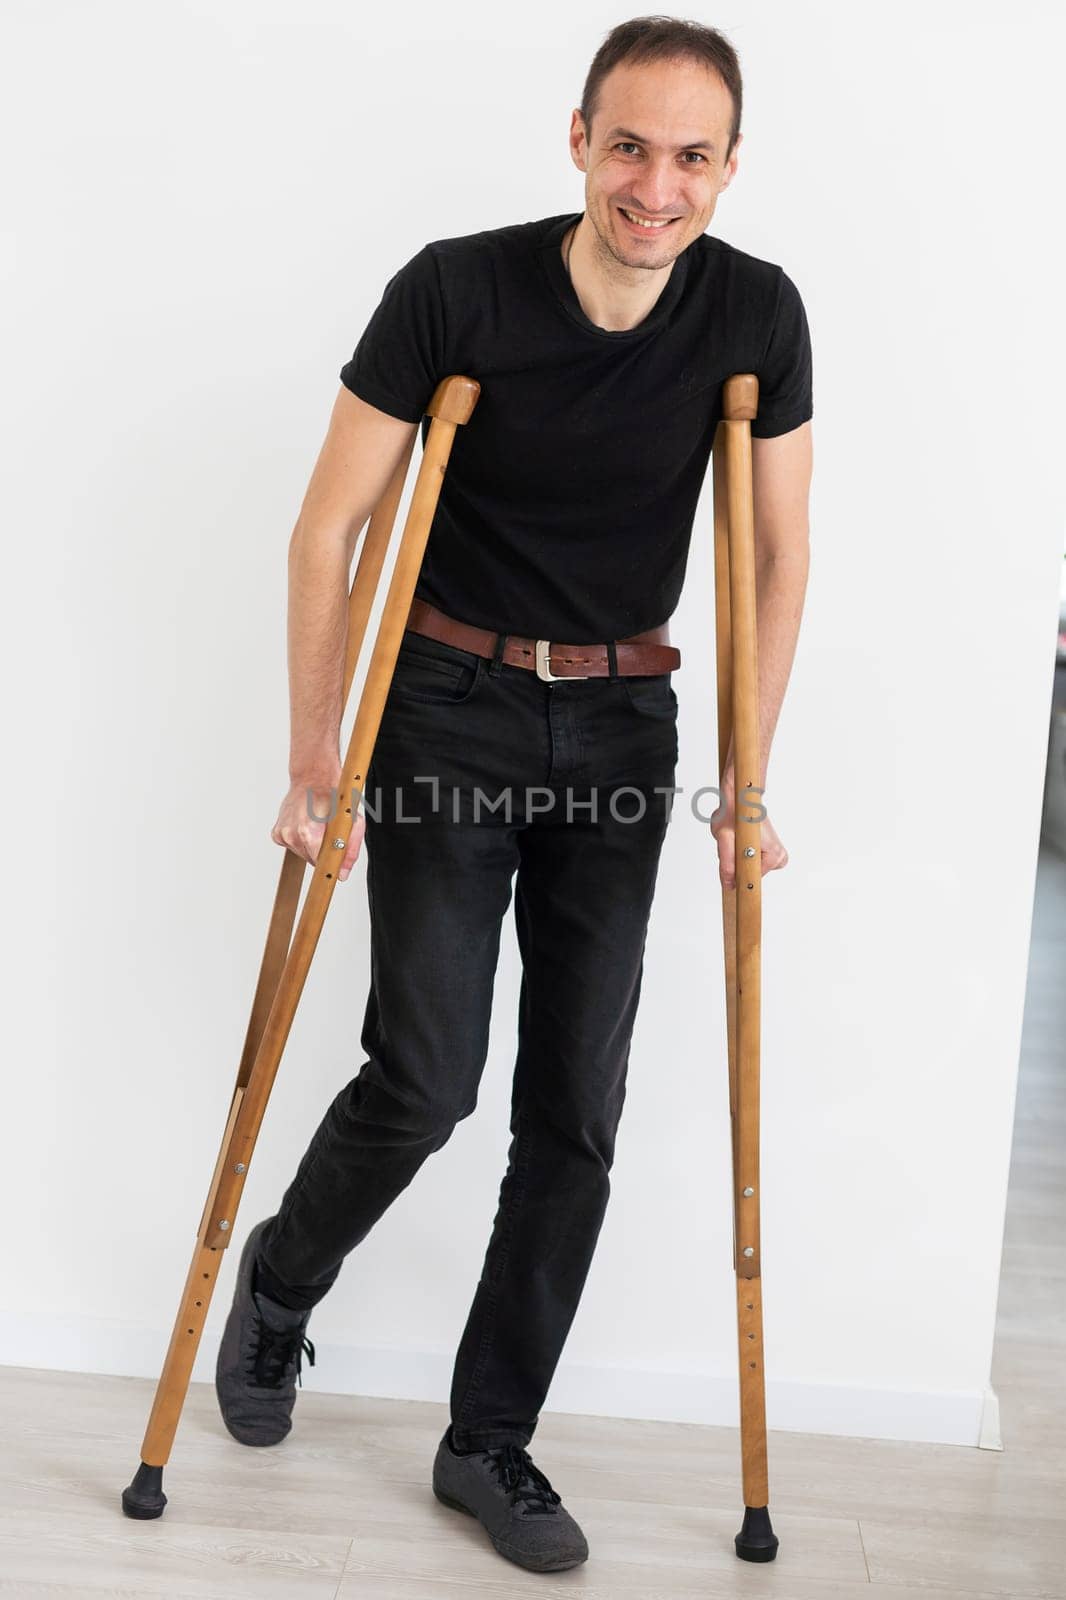 Young man with axillary crutches by Andelov13